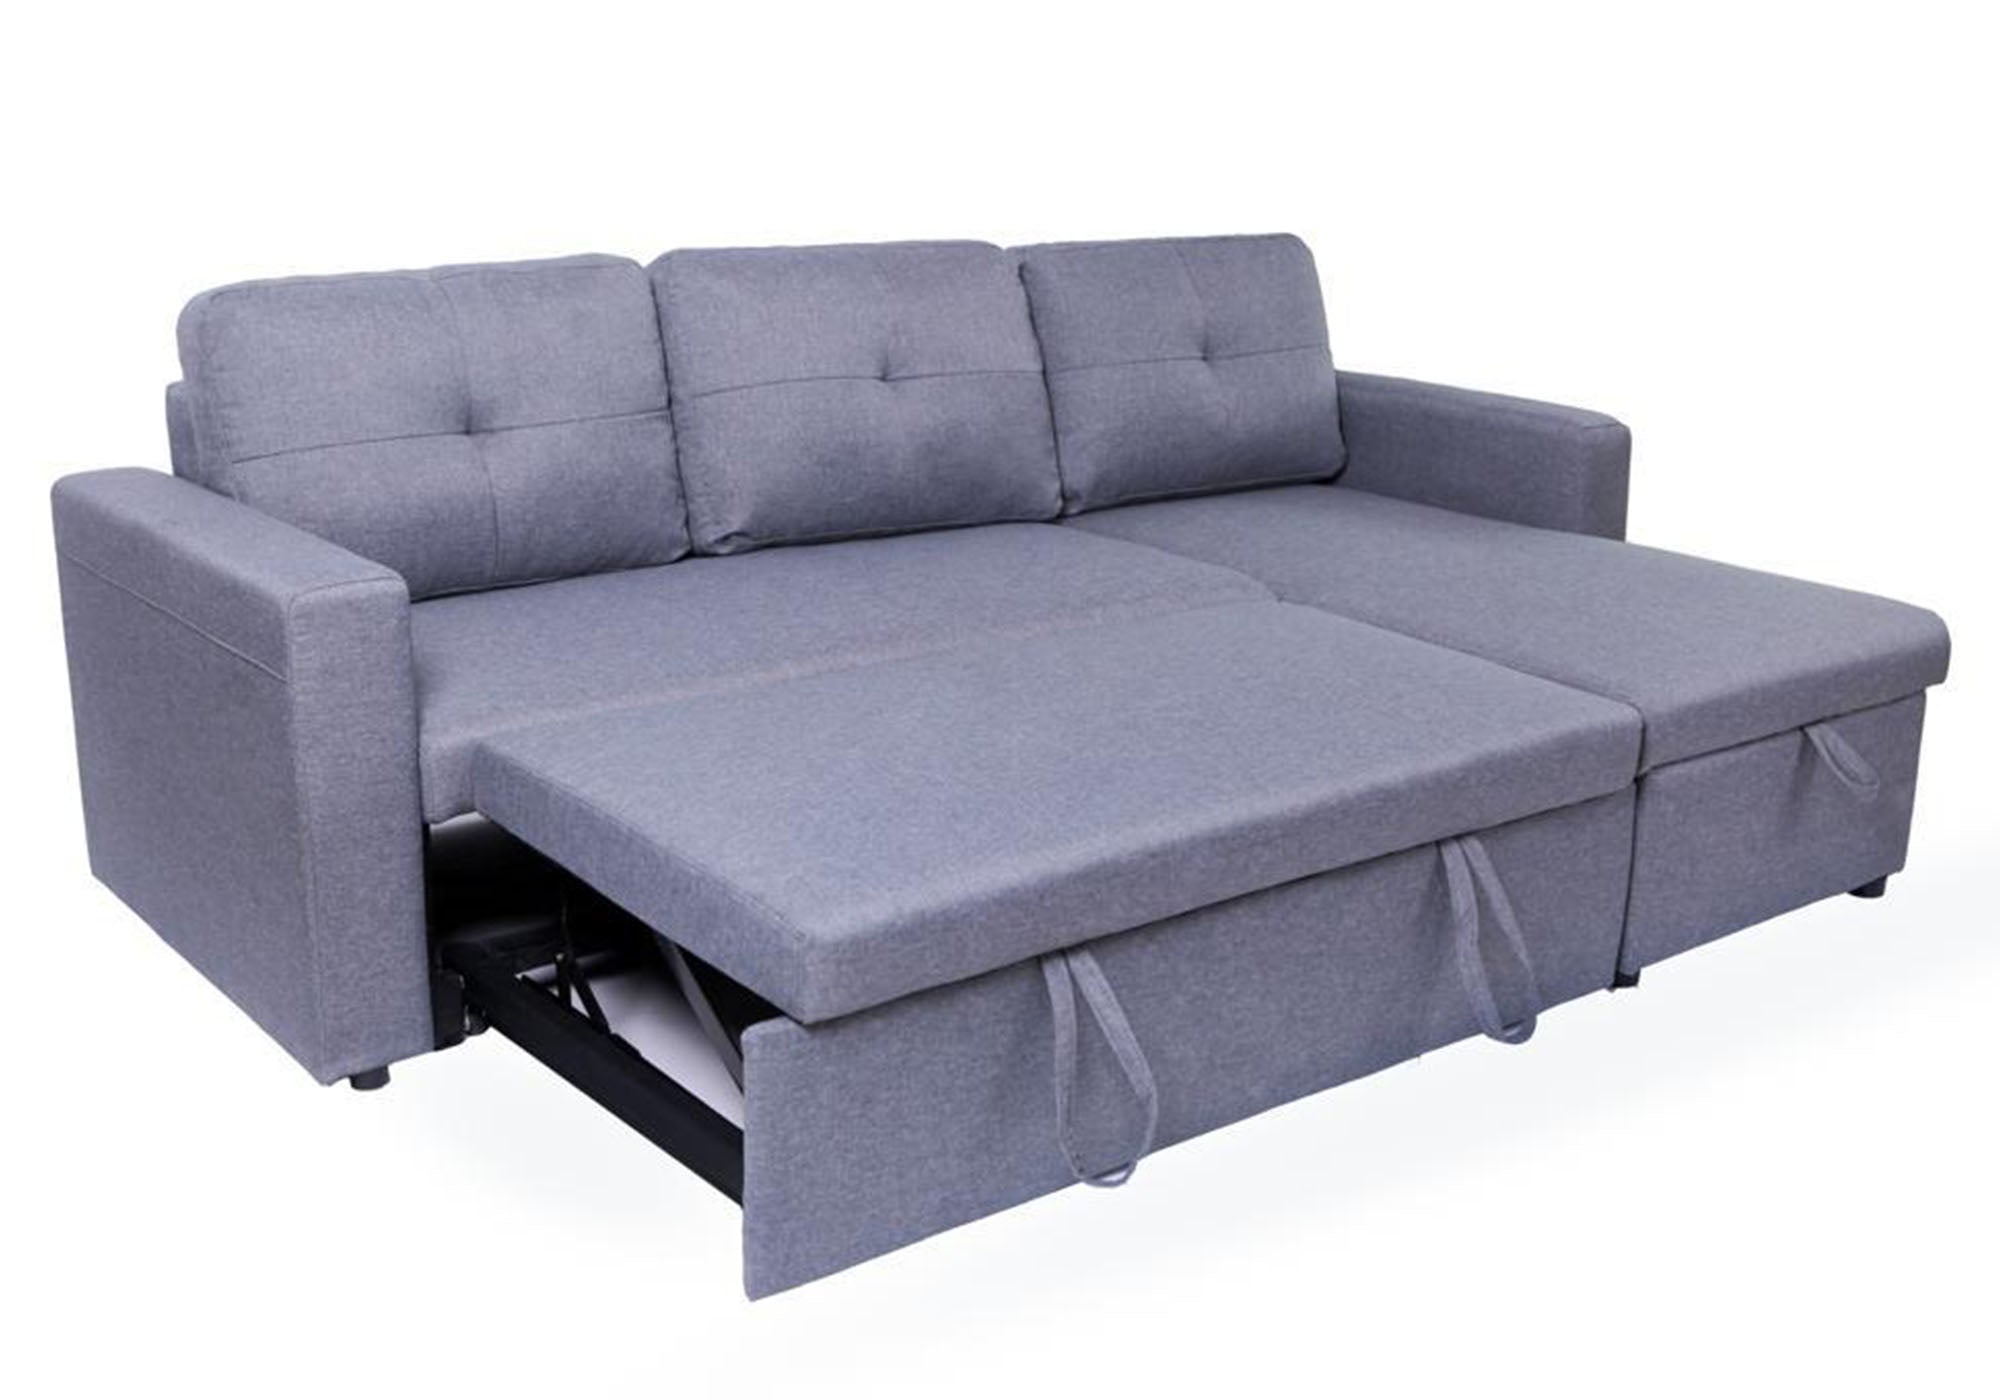 Sectionnel convertible - sofa bed SOFA-BED-1